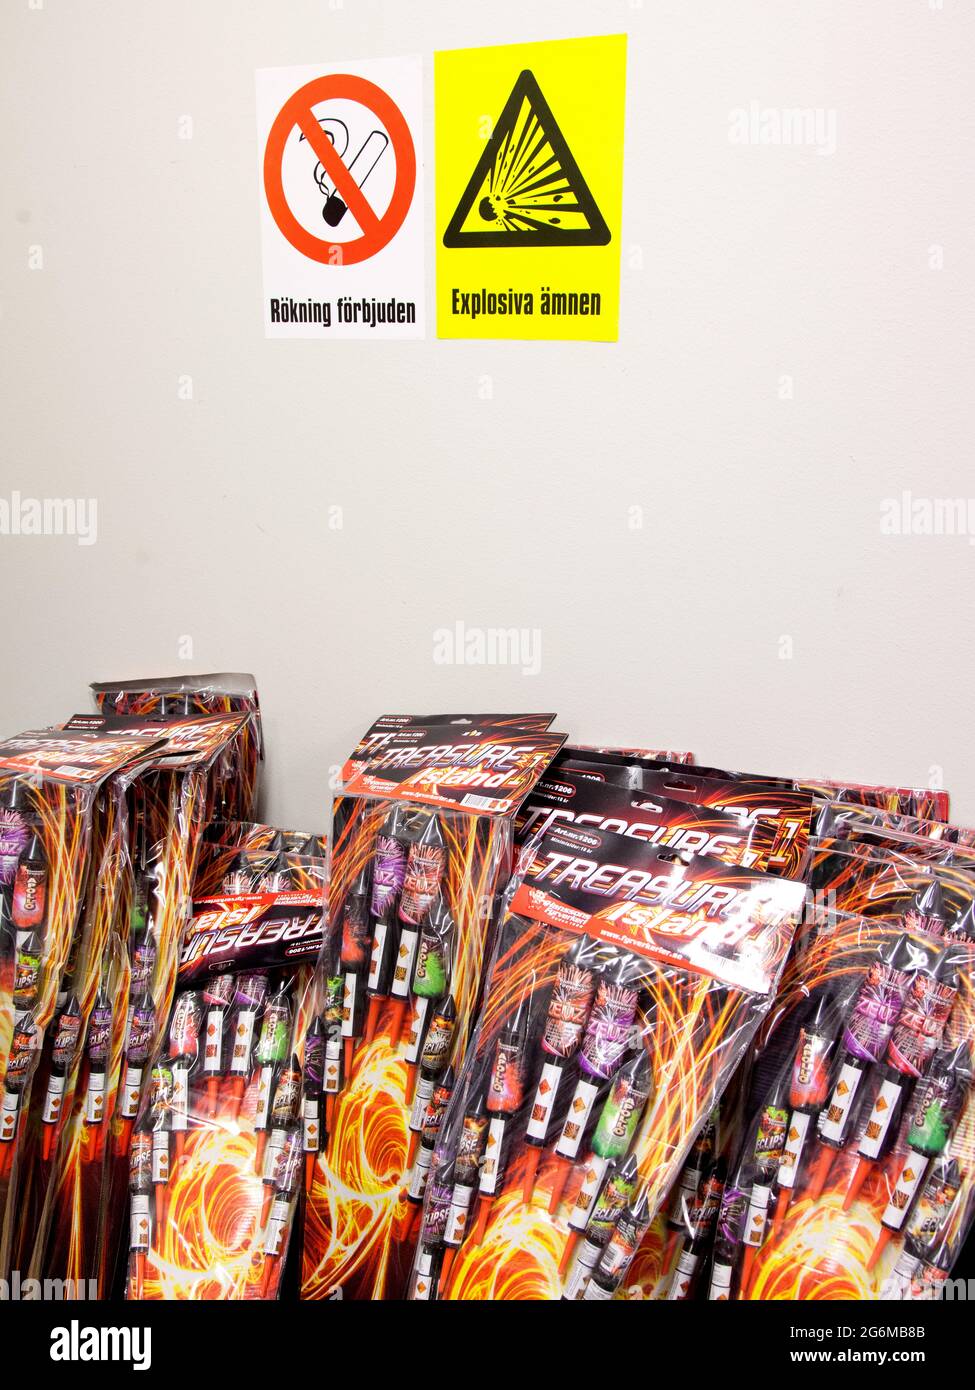 Sales of various types of fireworks. Stock Photo